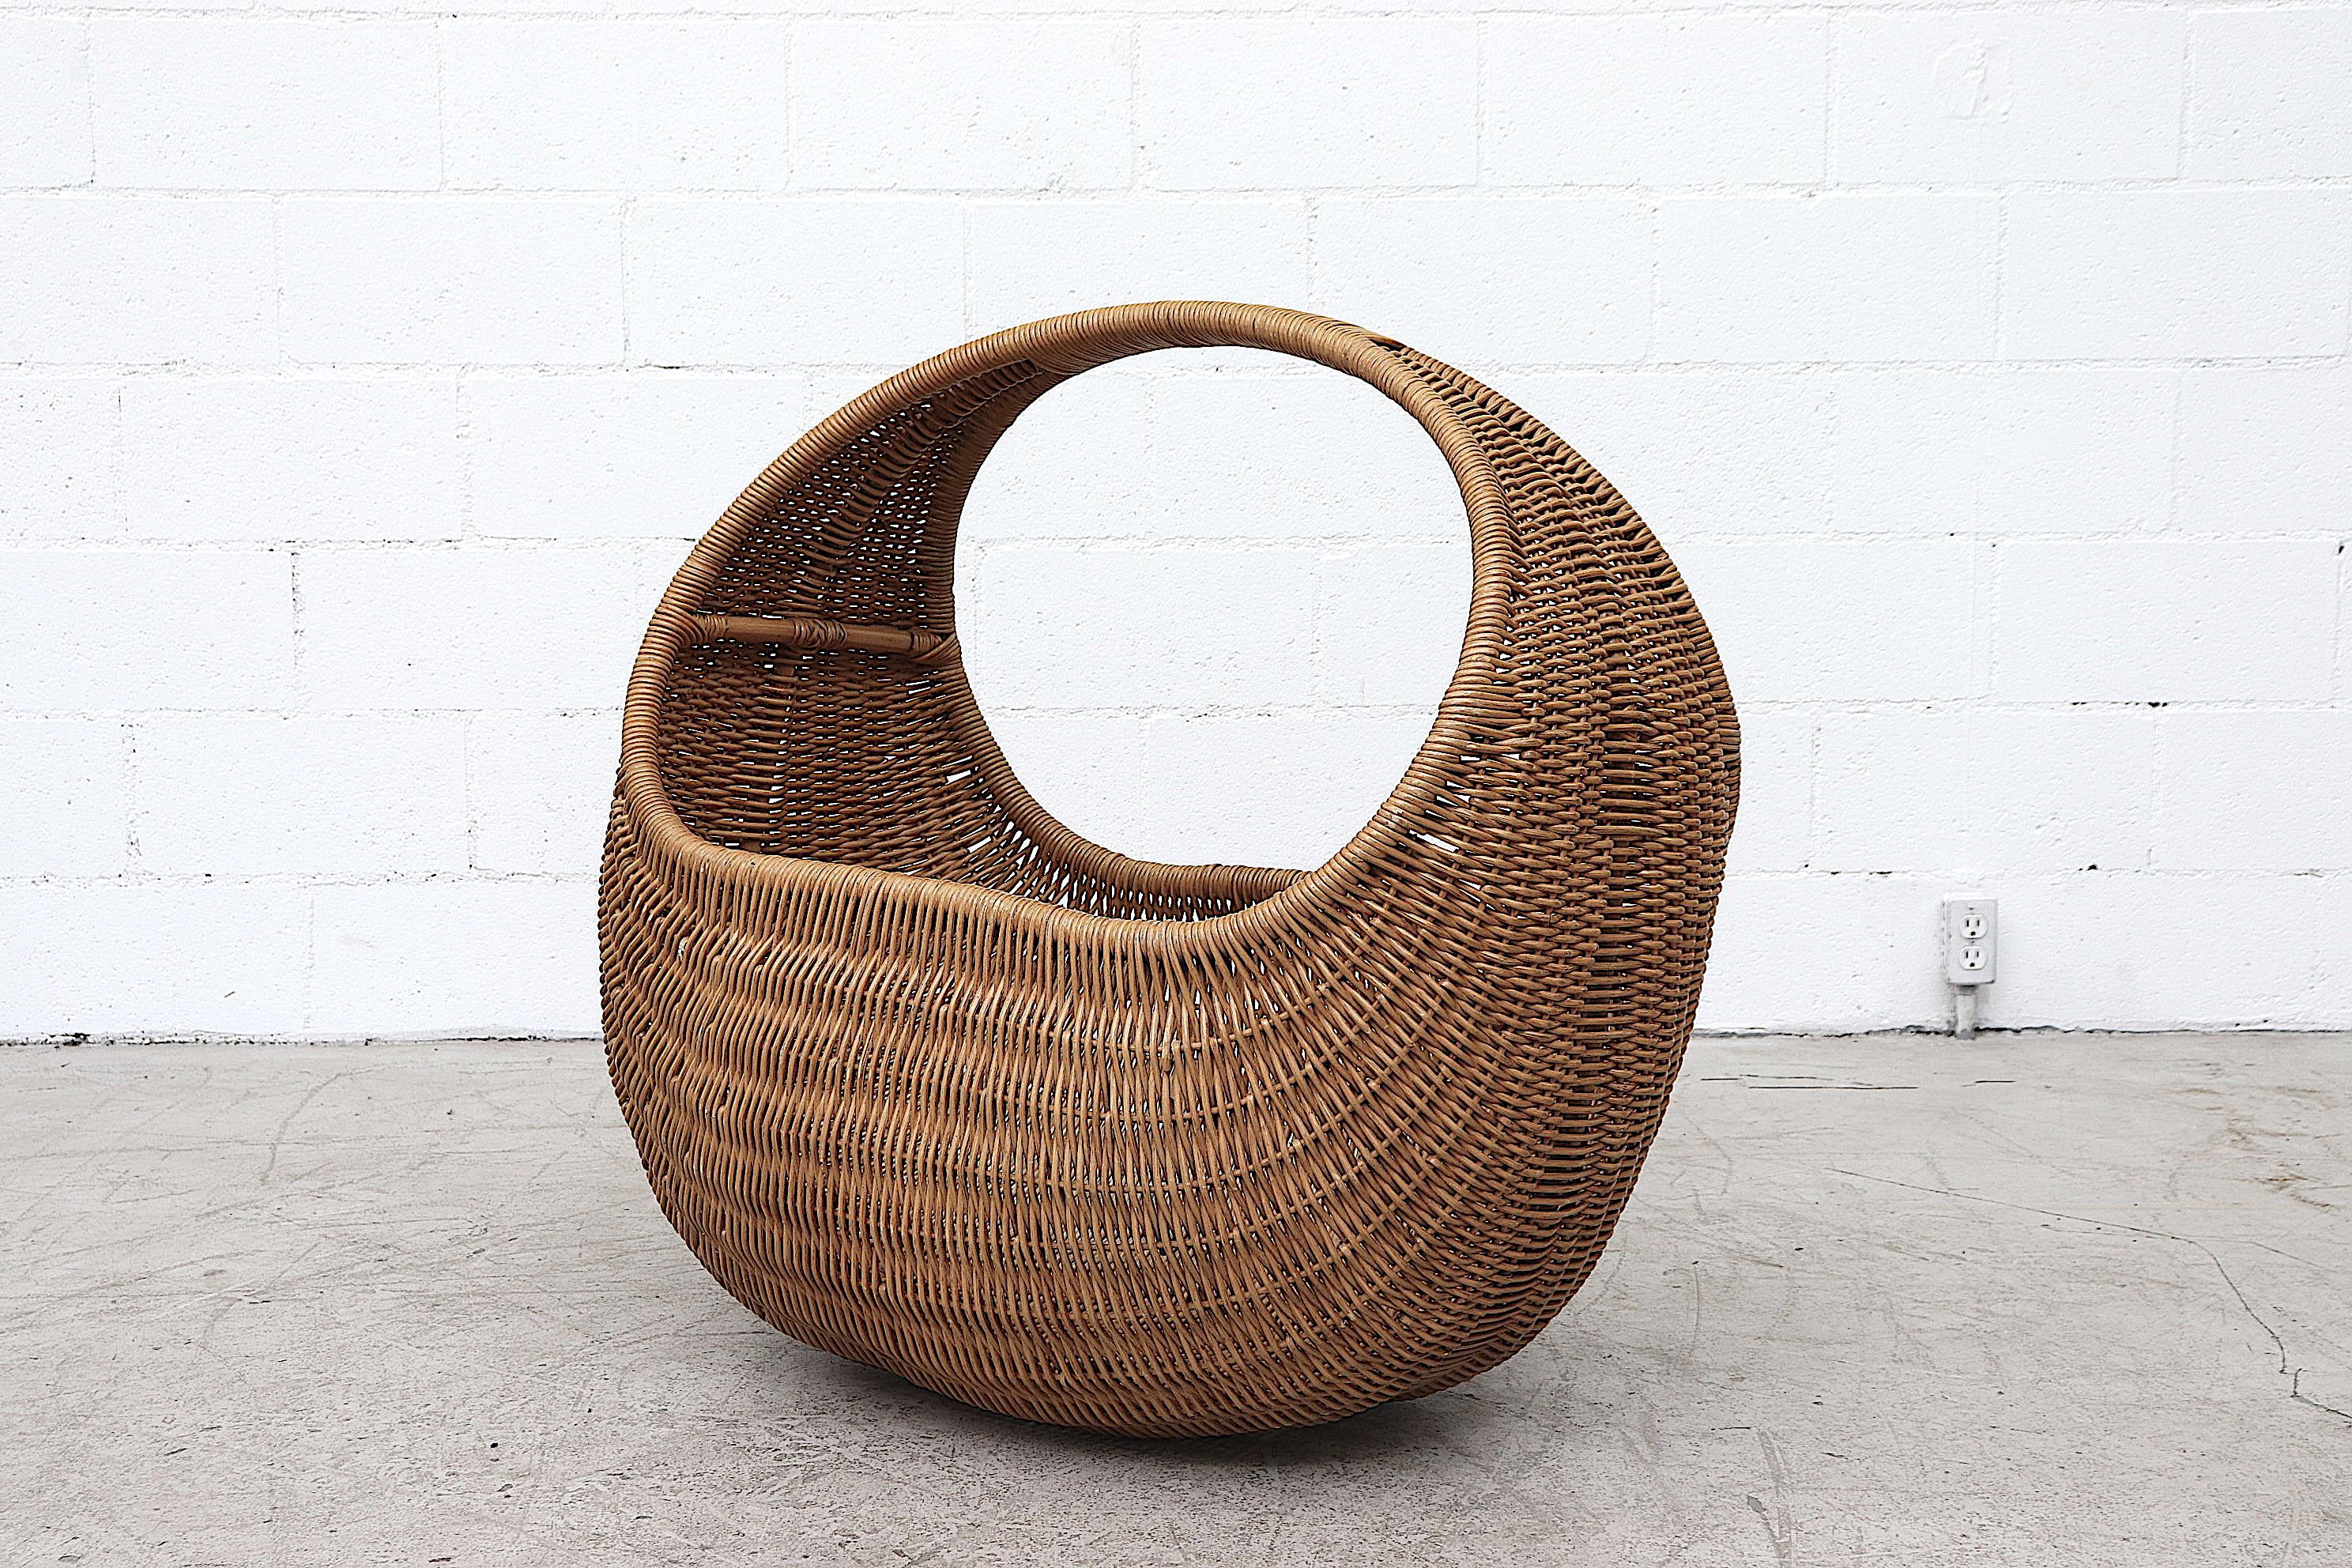 Beautiful, oversized, hand-woven rattan and bamboo baby basket. Comes with new, removable foam cushion and wood support inside. In good original condition with minimal breakage and moderate wear consistent with its age.